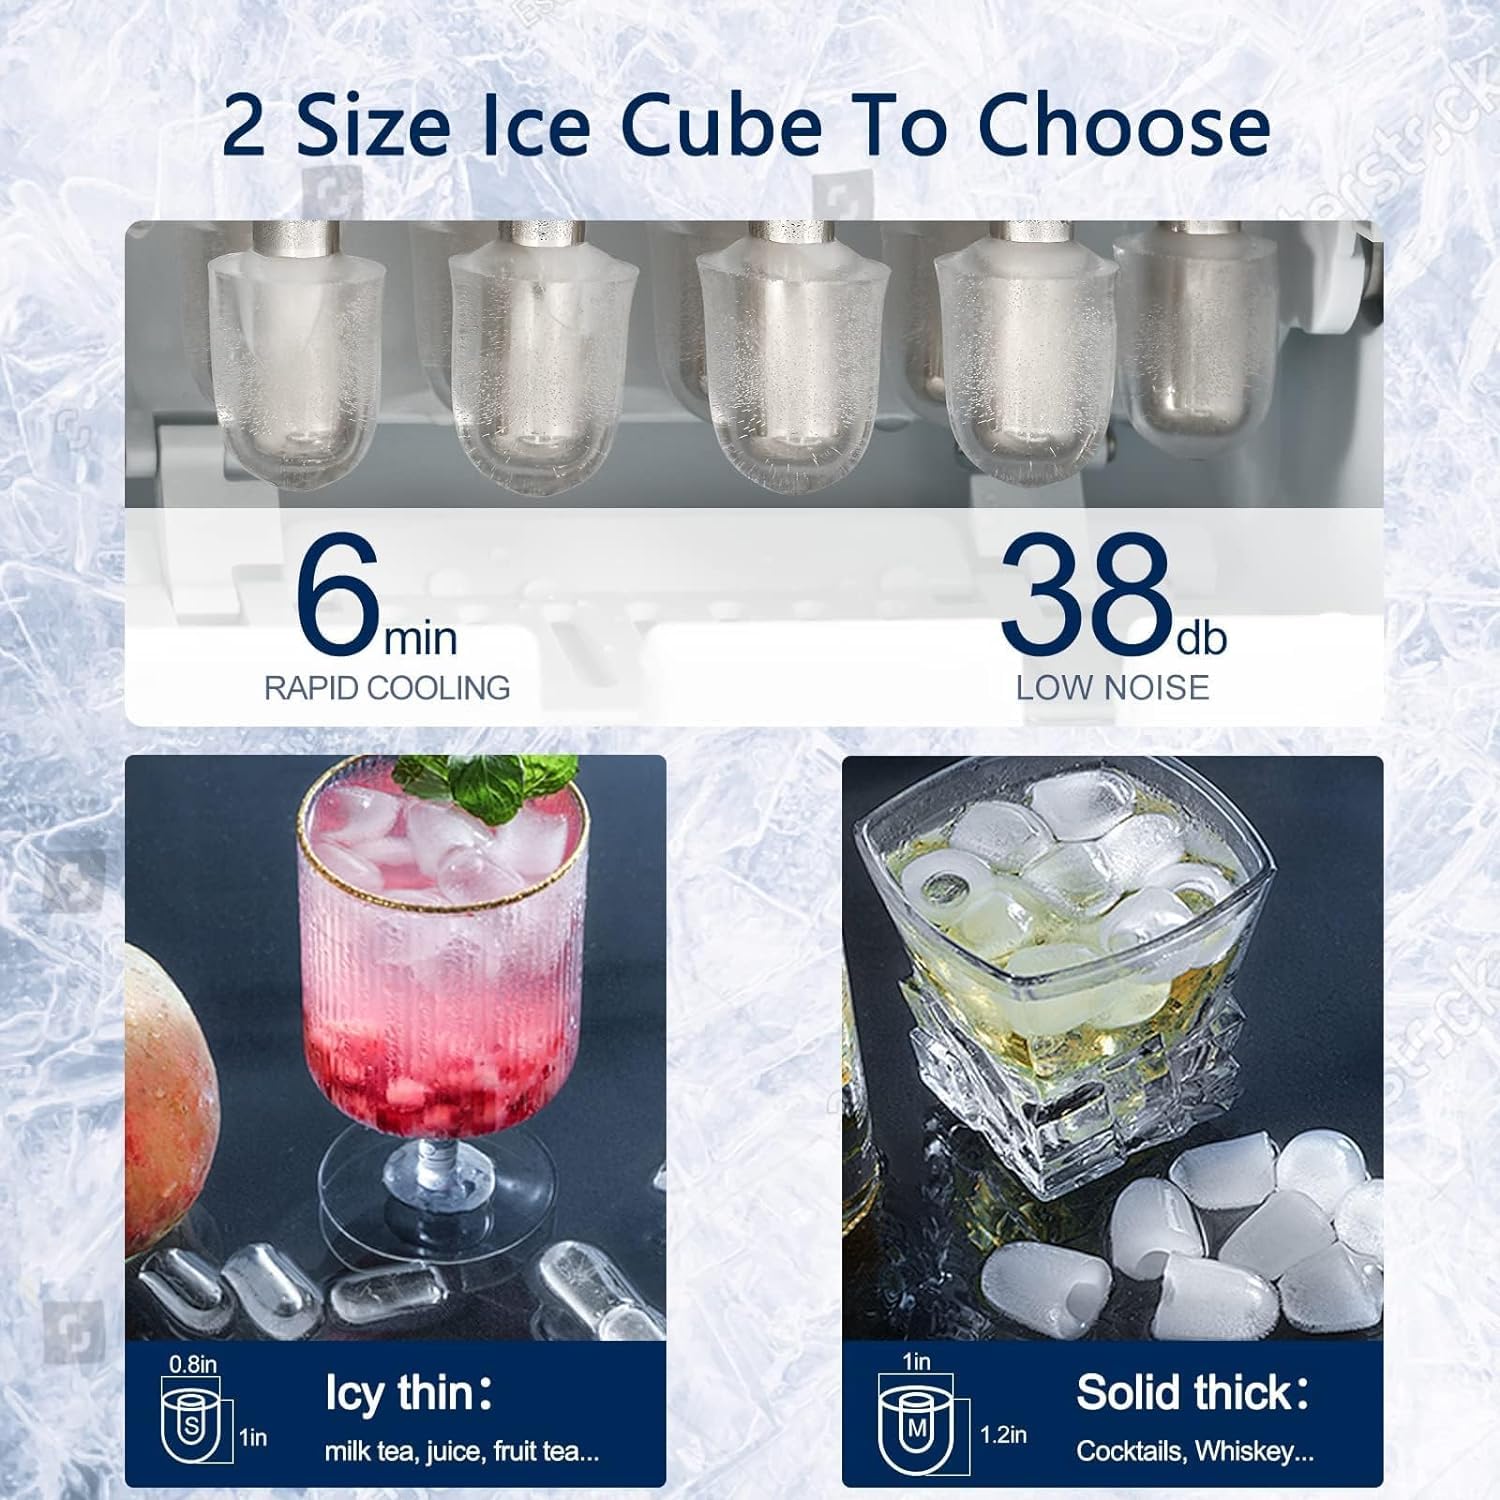 Joy Pebble Portable Ice Maker Ice Machine Countertop,26lbs Bullet Ice Cube in 24H,9 Cubes Ready in 6-8 Minutes,2 Ice Sizes(S/L),Portable Ice Maker with Ice Scoop&Basket for Home/Office/Bar (Black)